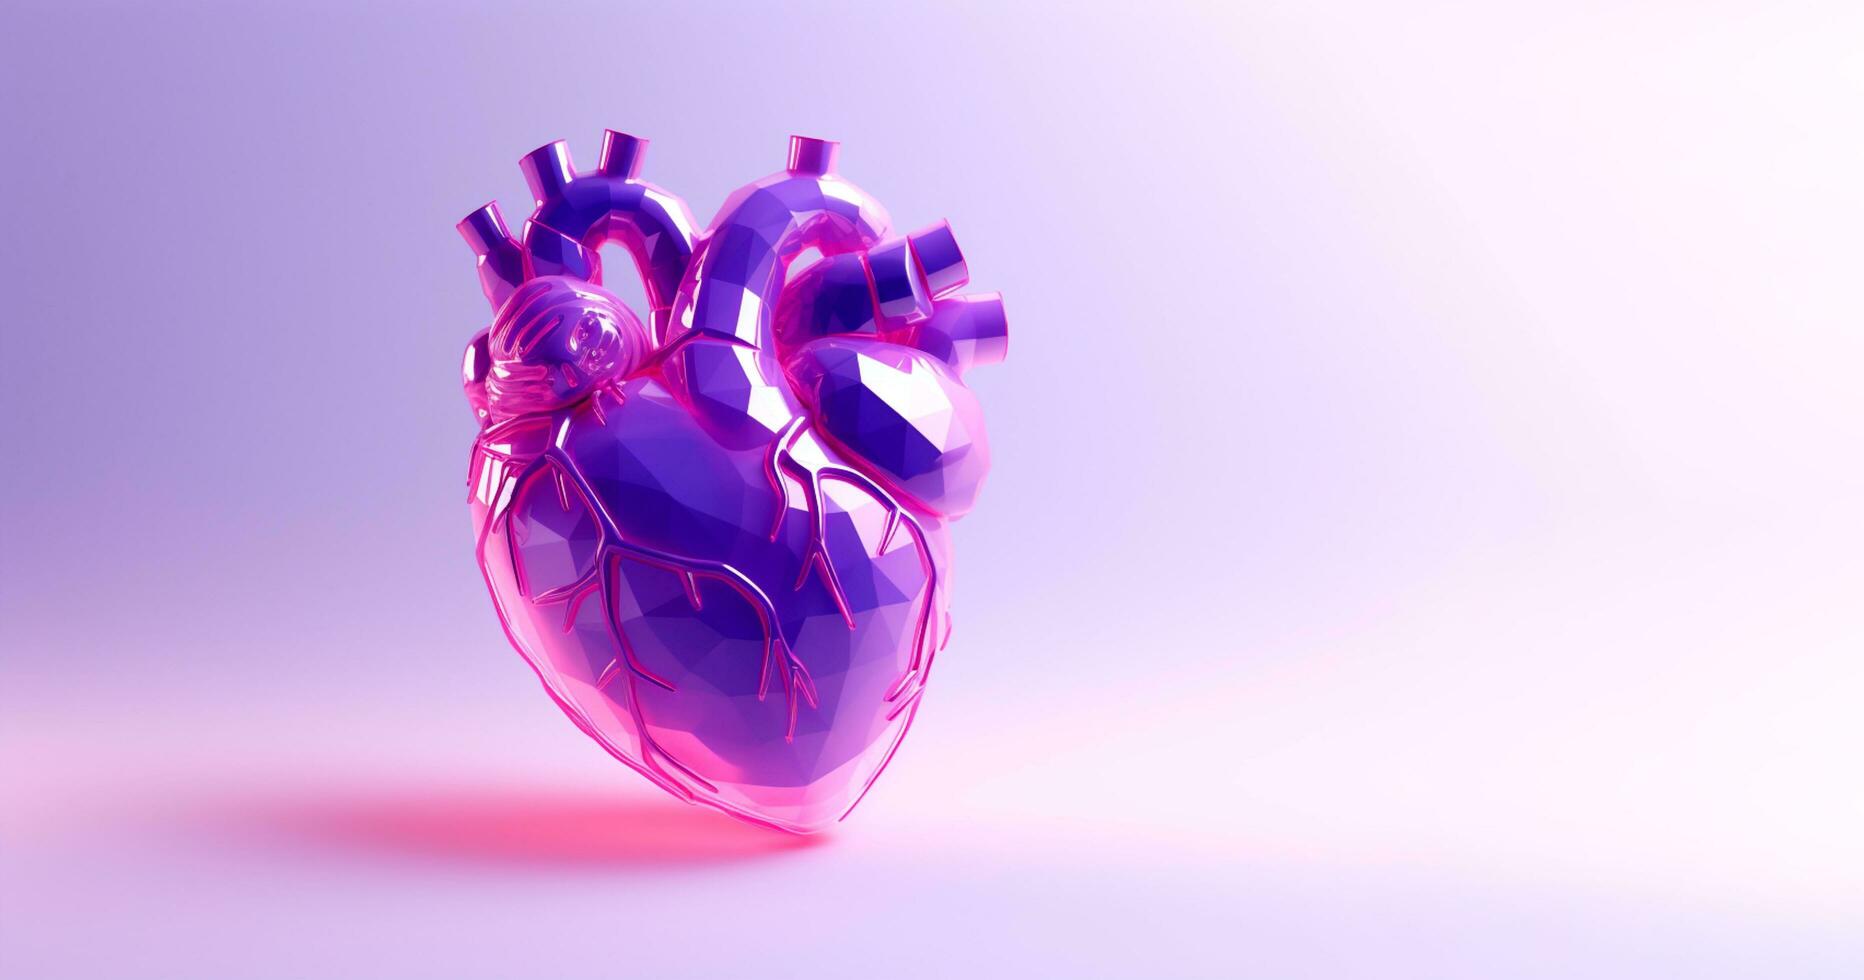 3d rendering of a human heart on a purple background photo